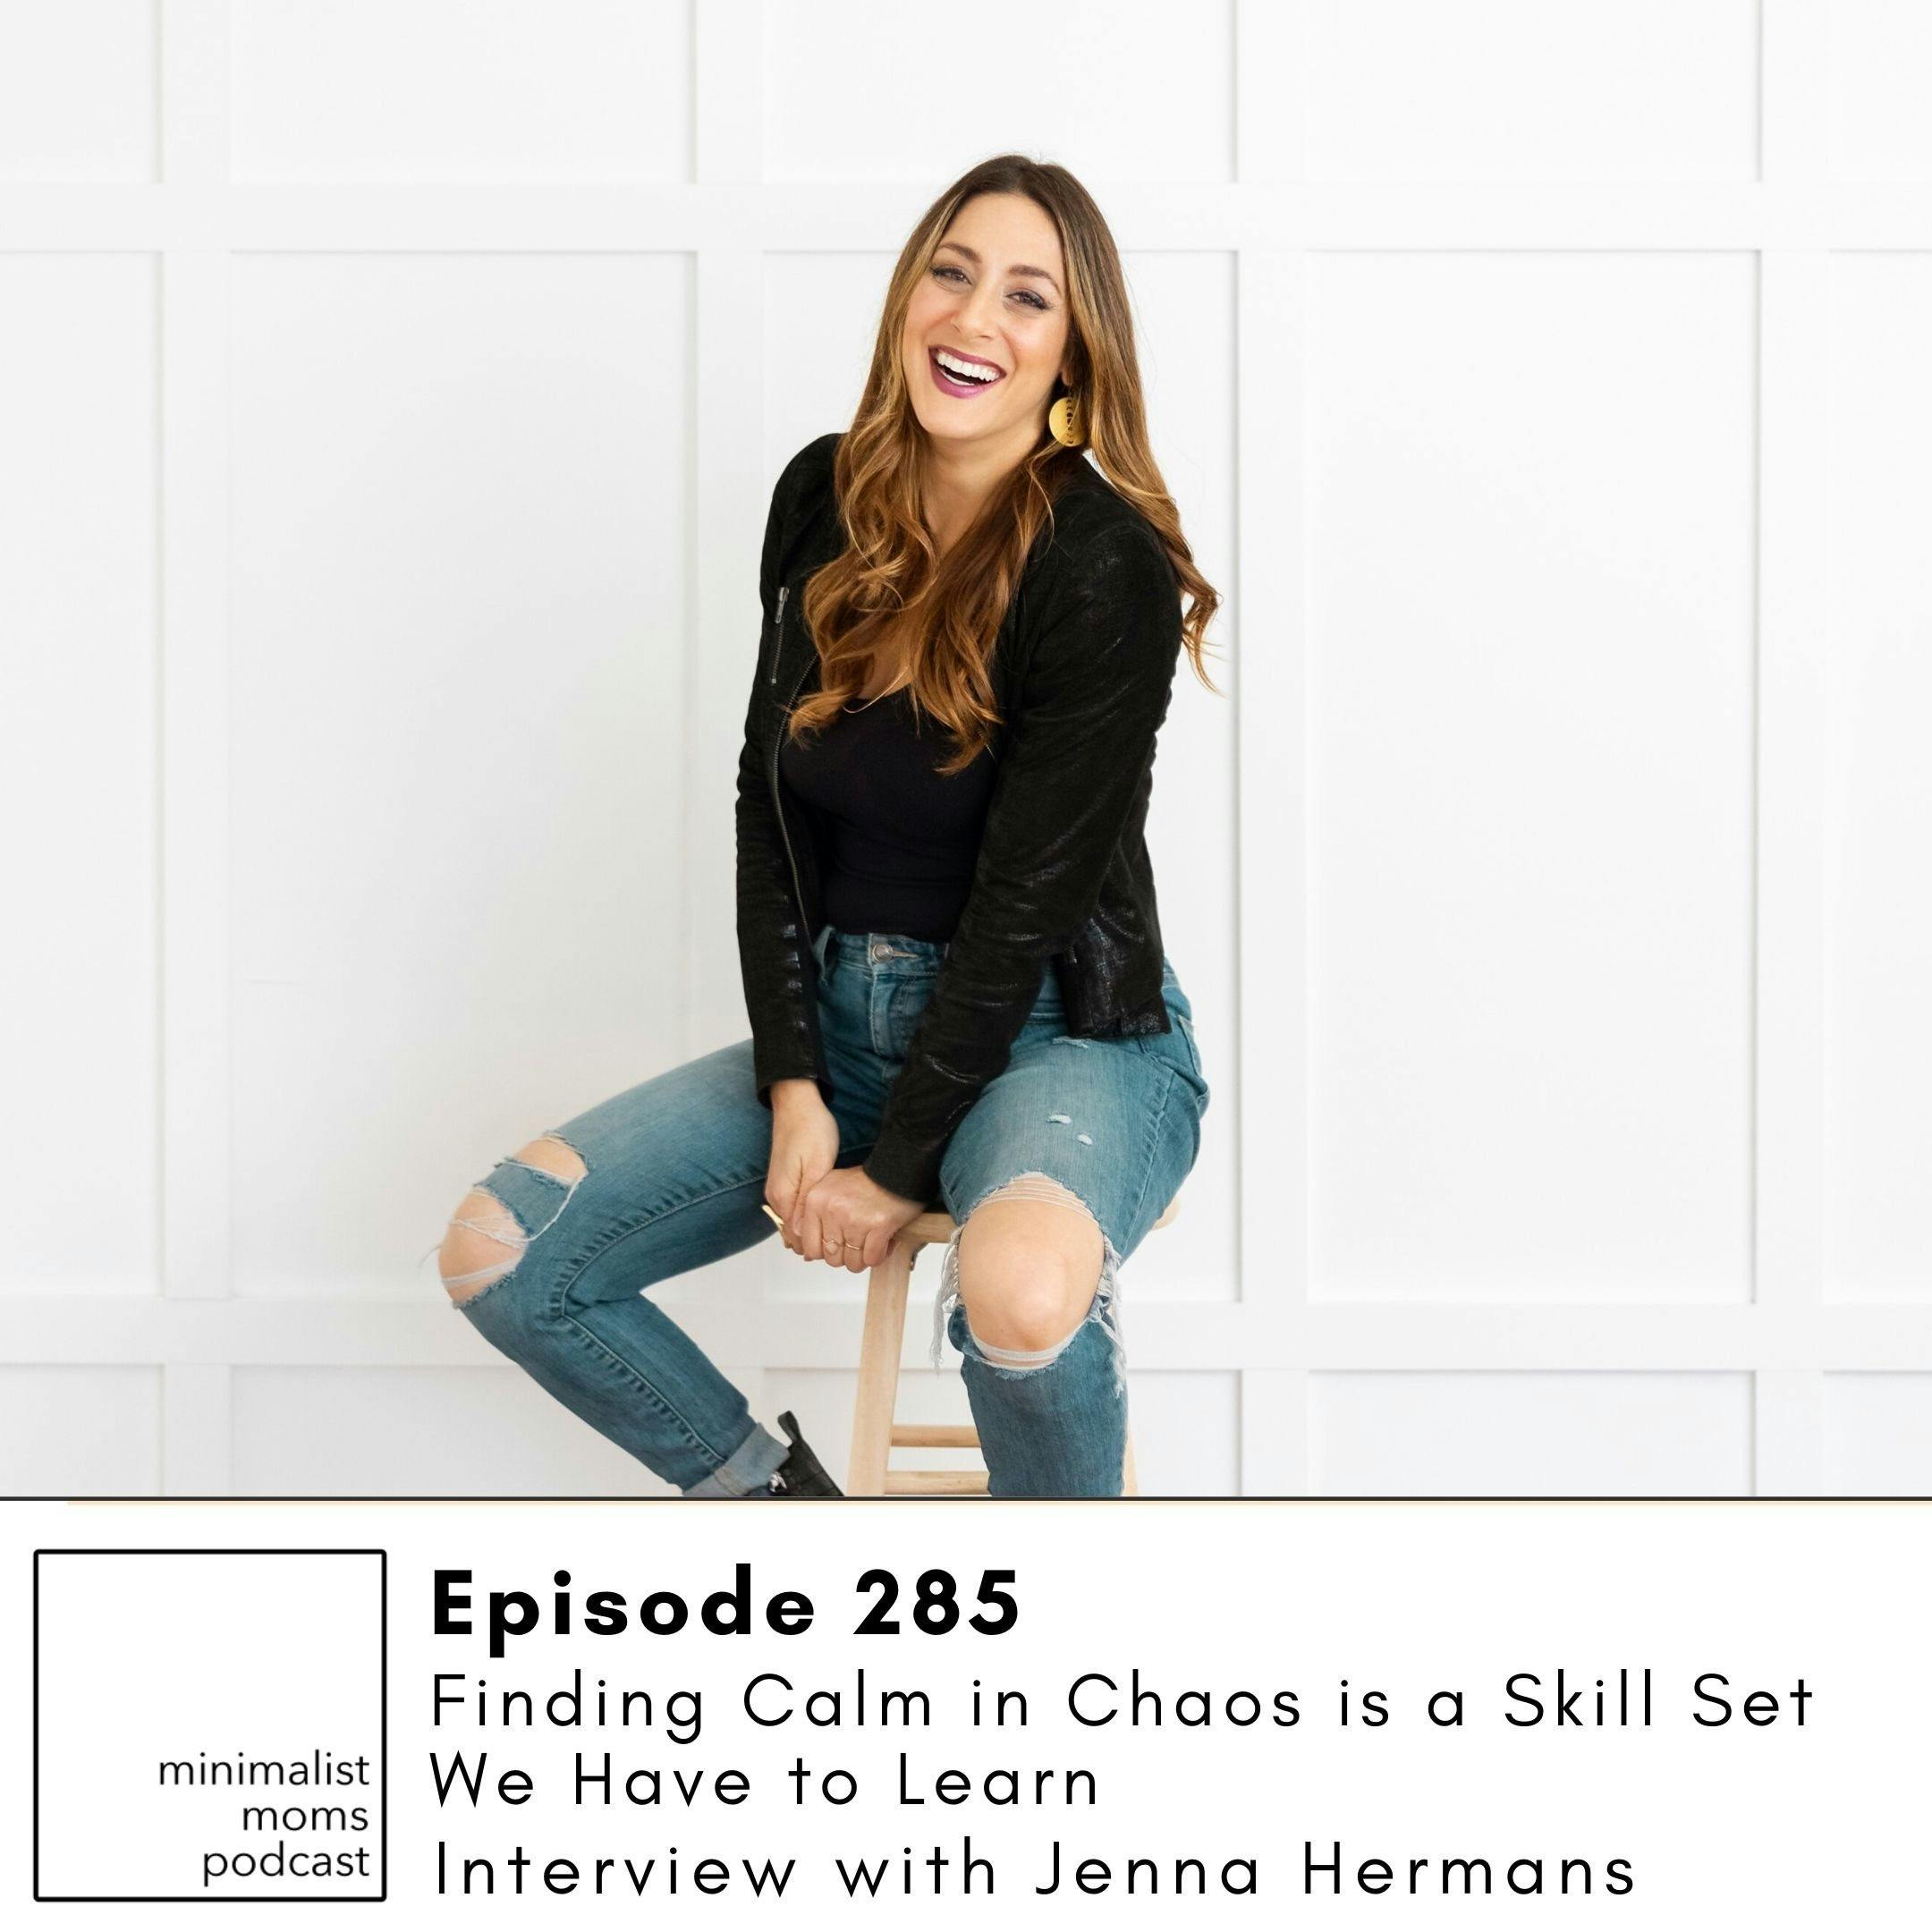 EP285: Finding Calm in Chaos is a Skill Set We Have to Learn with Jenna Hermans